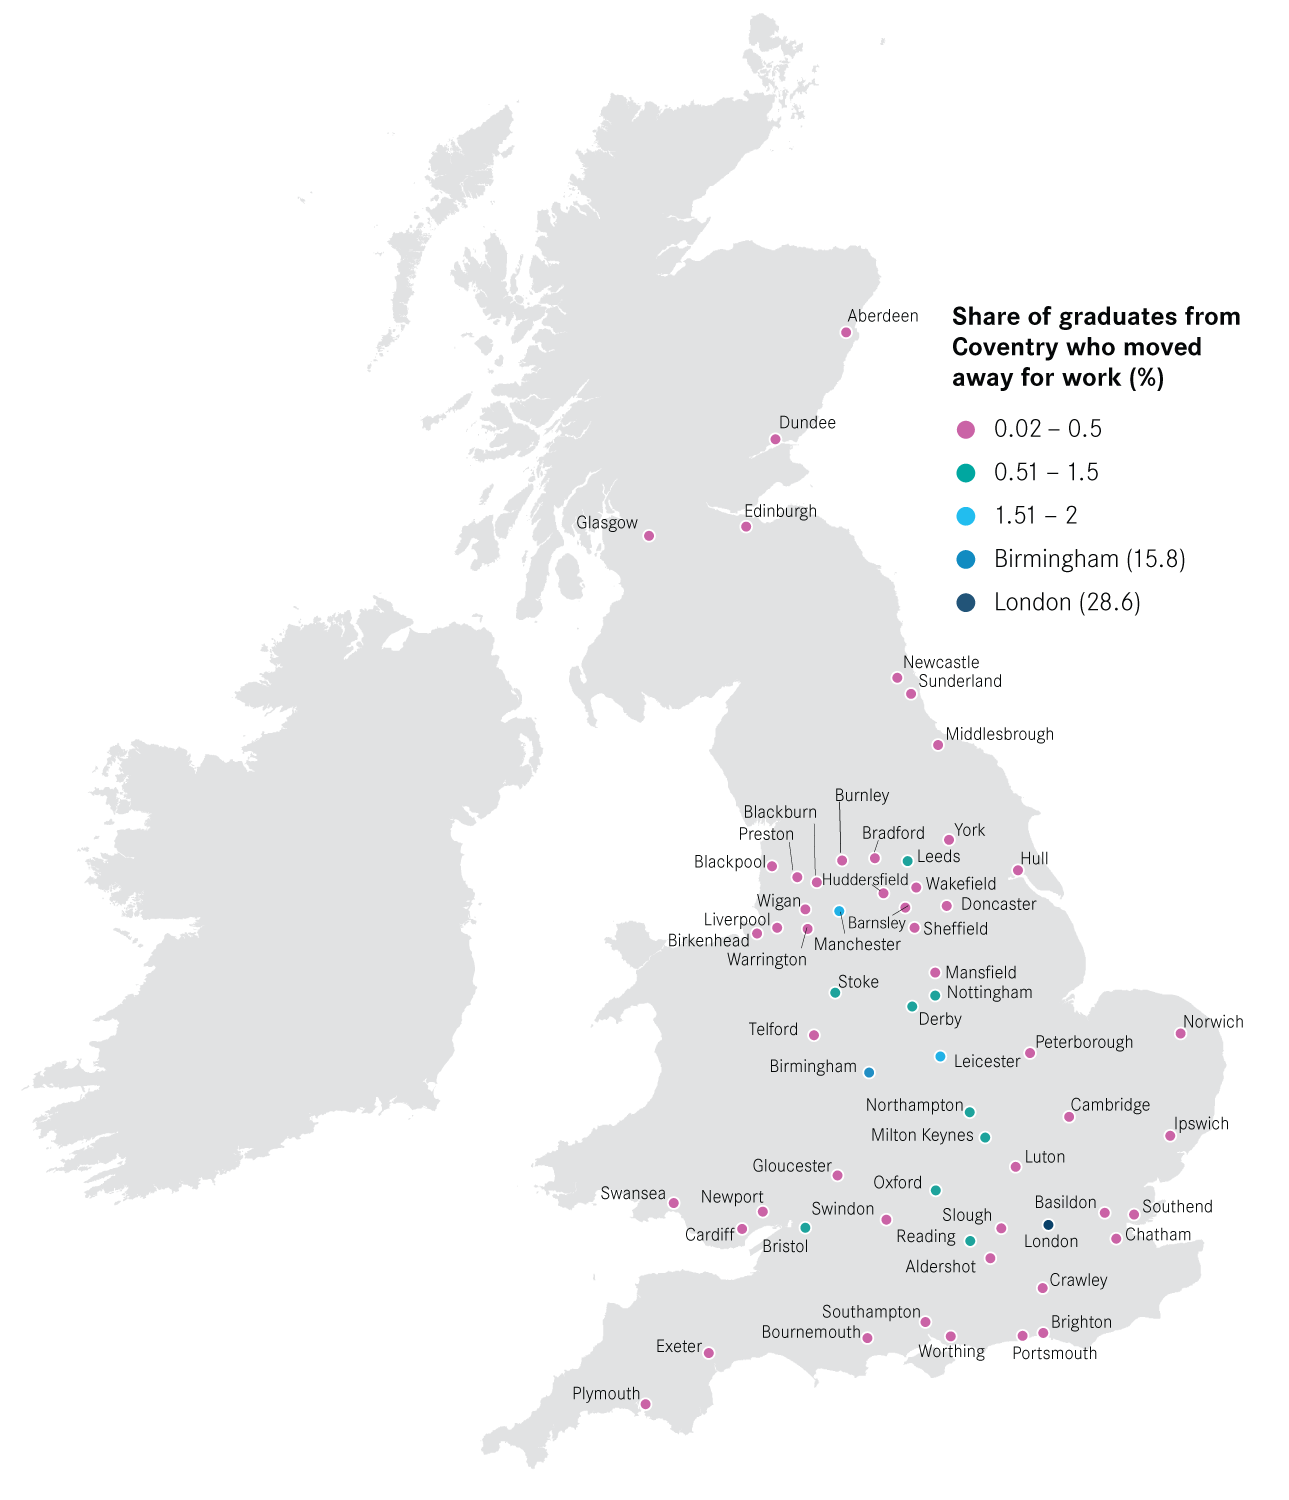 16: Destinations of Coventry’s graduates who move to other cities for work, 2013/14–2014/15